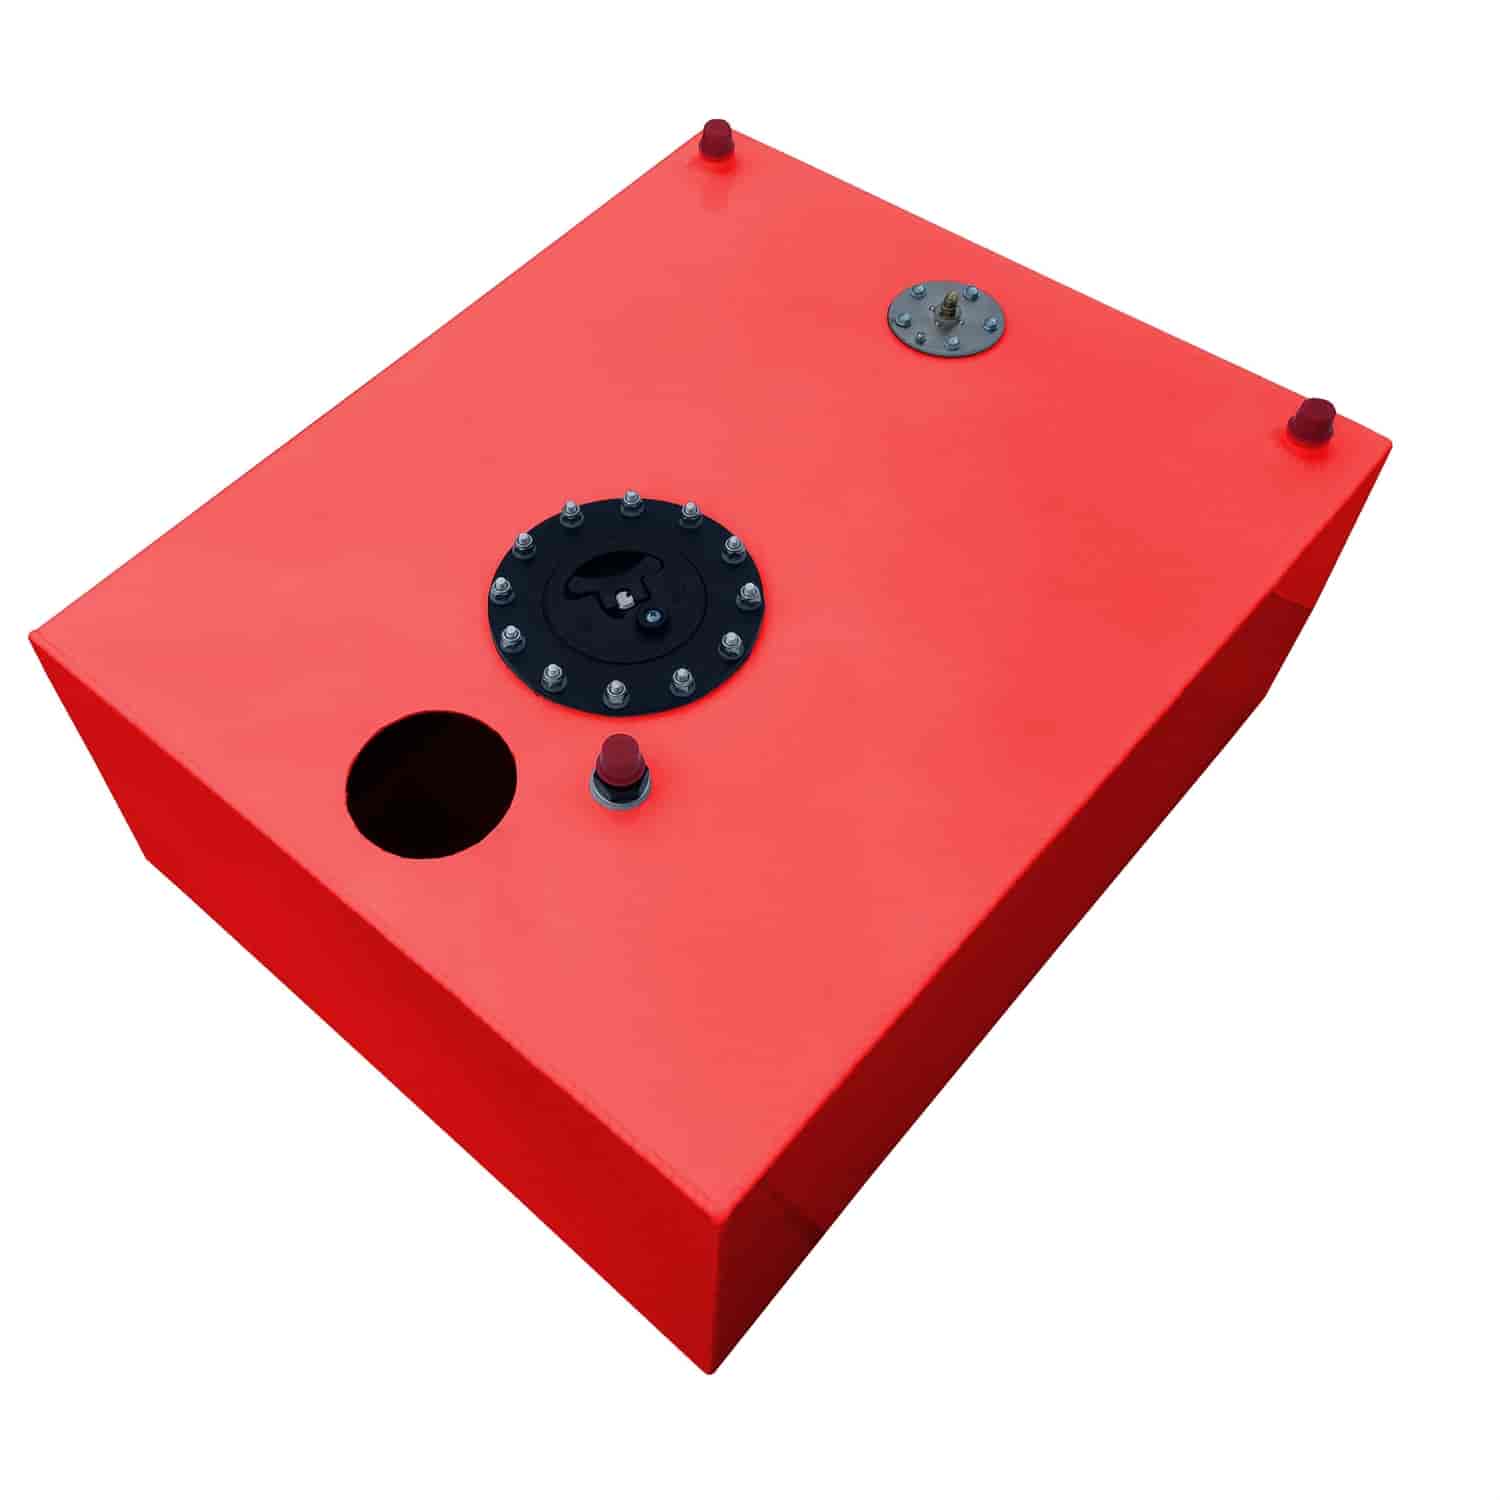 20-Gallon Aluminum EFI Pump Ready Fuel Cell 24 in. L x 20 in. W x 10 in. H - Red